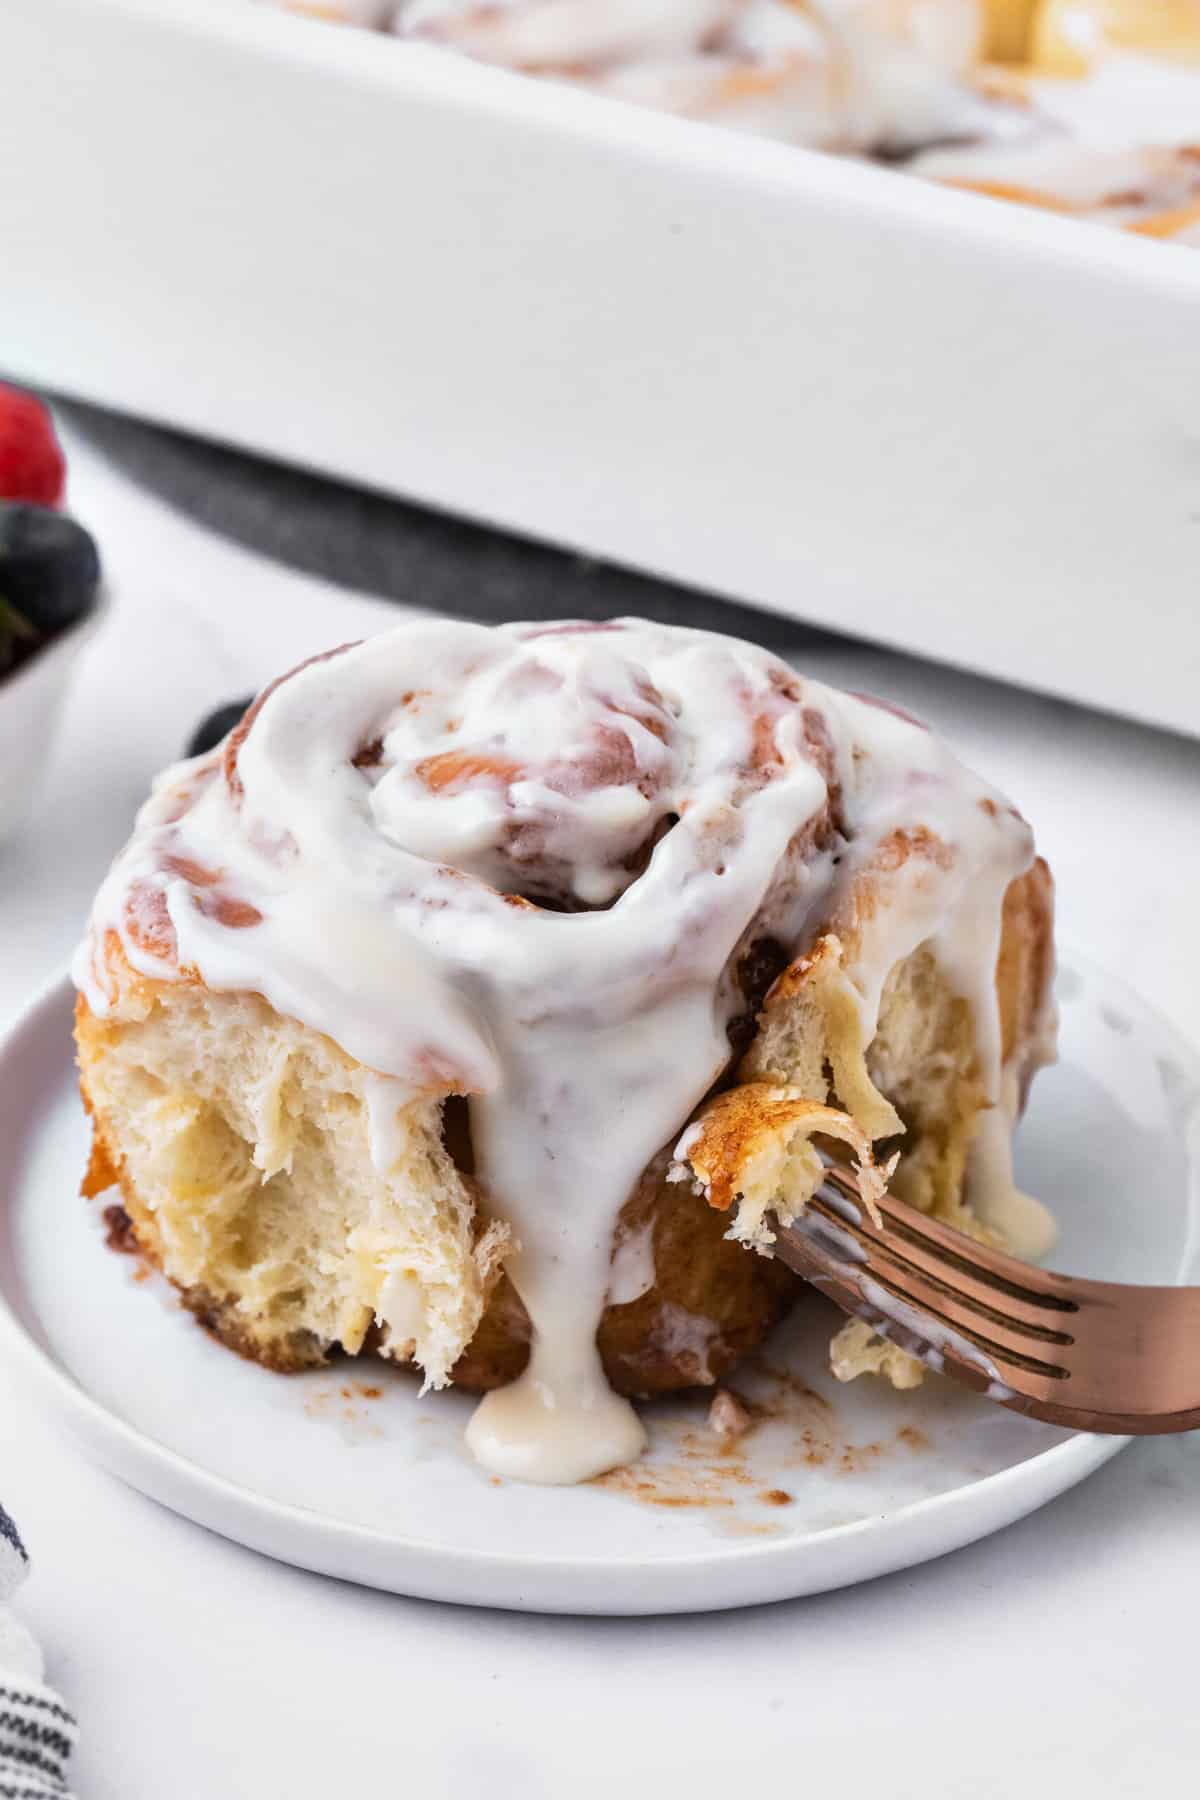 A cinnamon roll is plated with a fork.